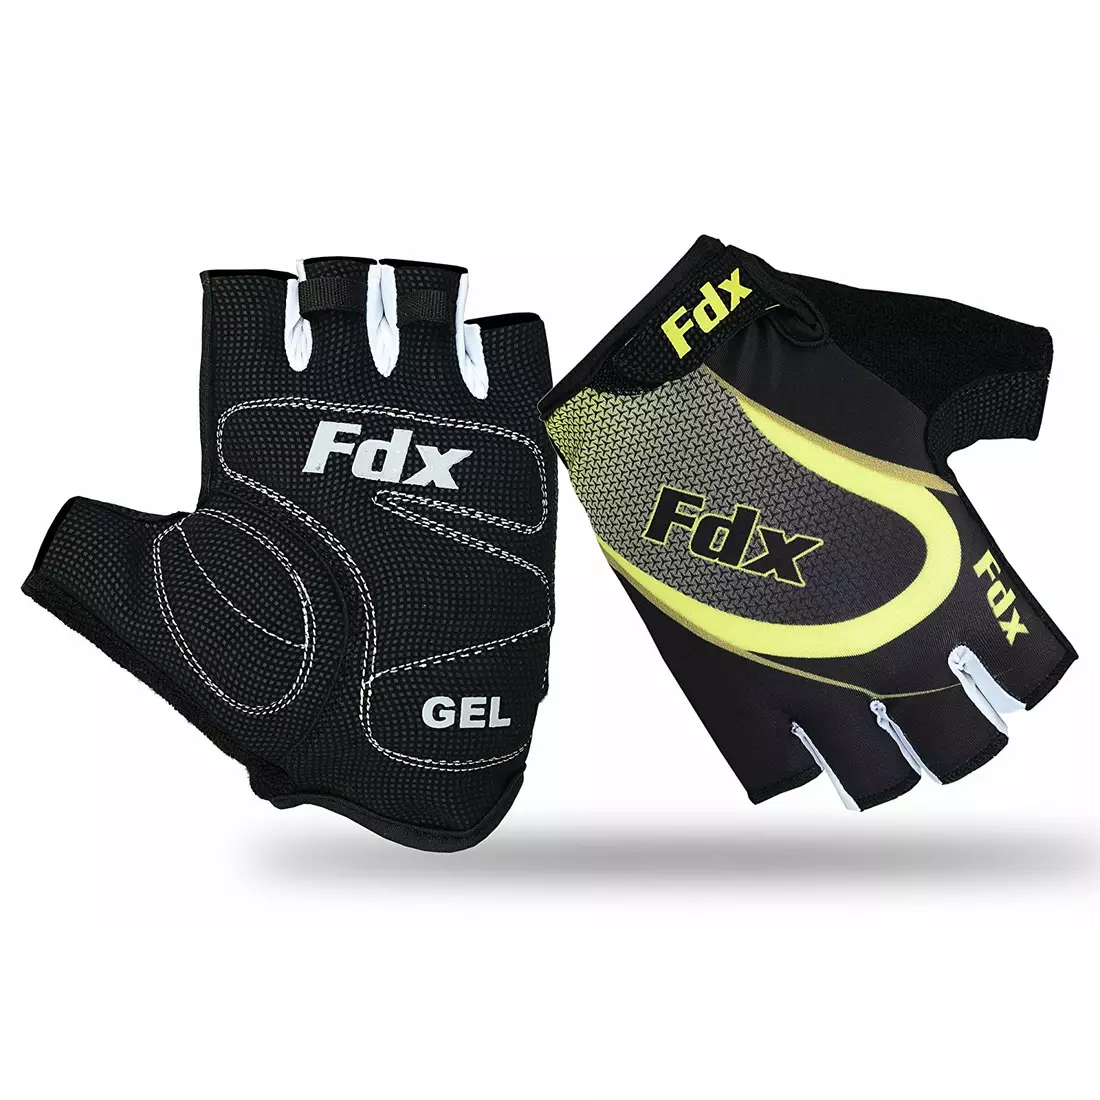 FDX 1010 men's cycling gloves black and yellow